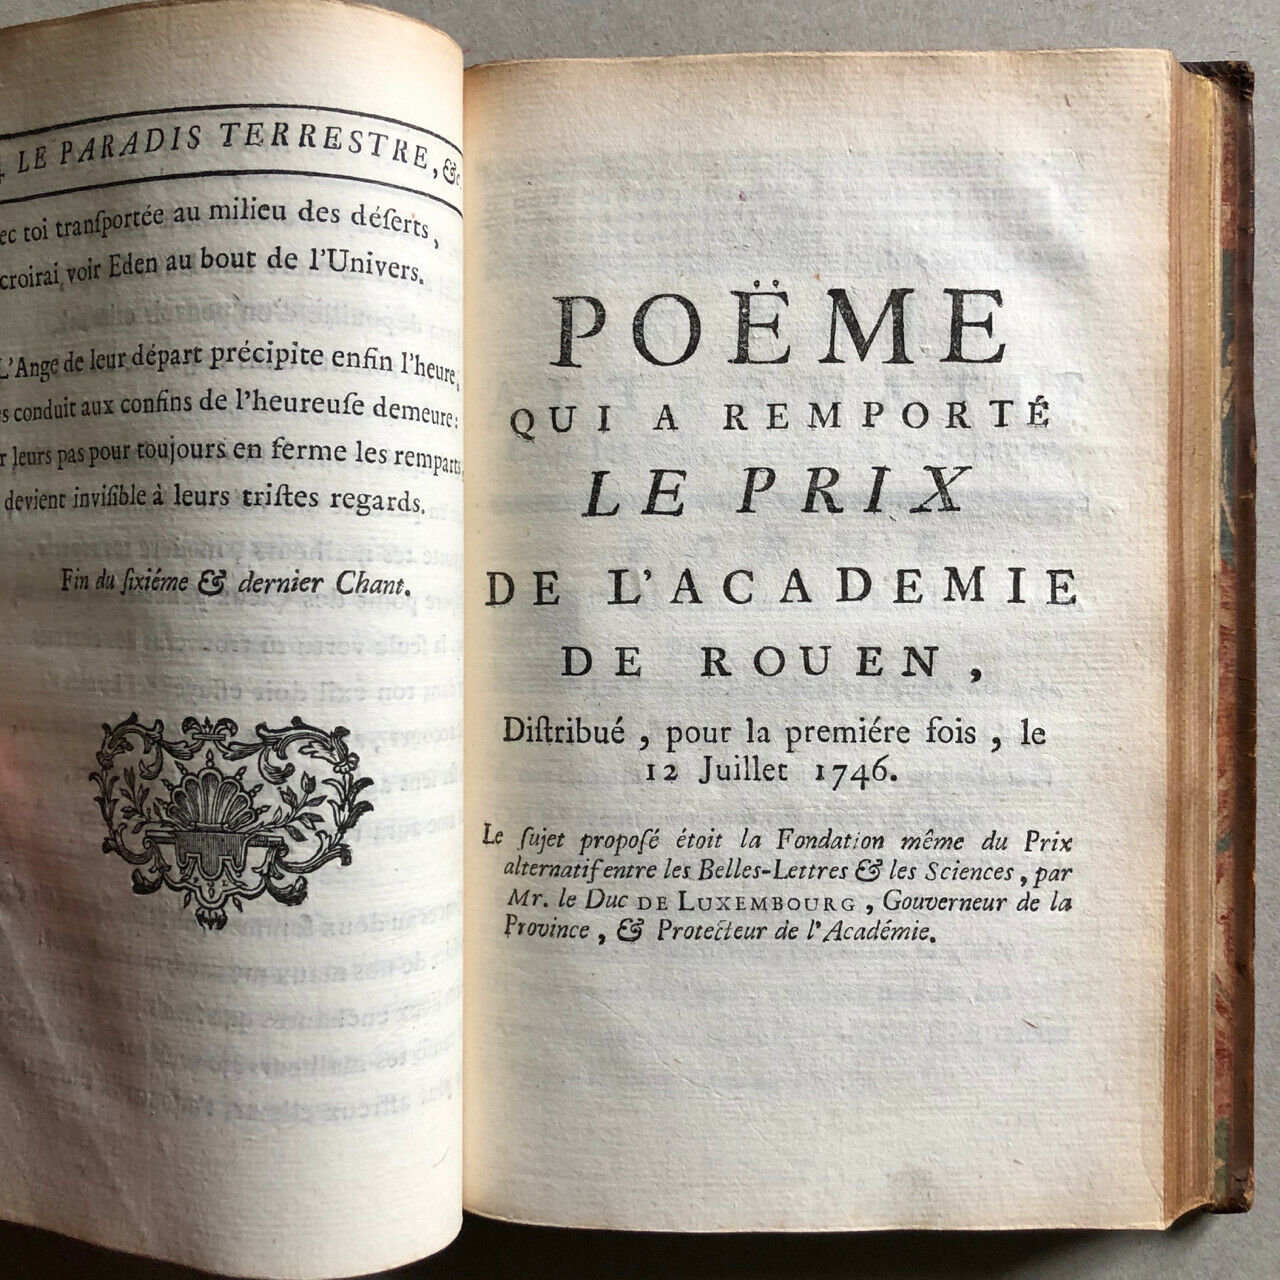 Duboccage — La Colombiade — e.o. — Terrestrial paradise — binding with arms — 1756.